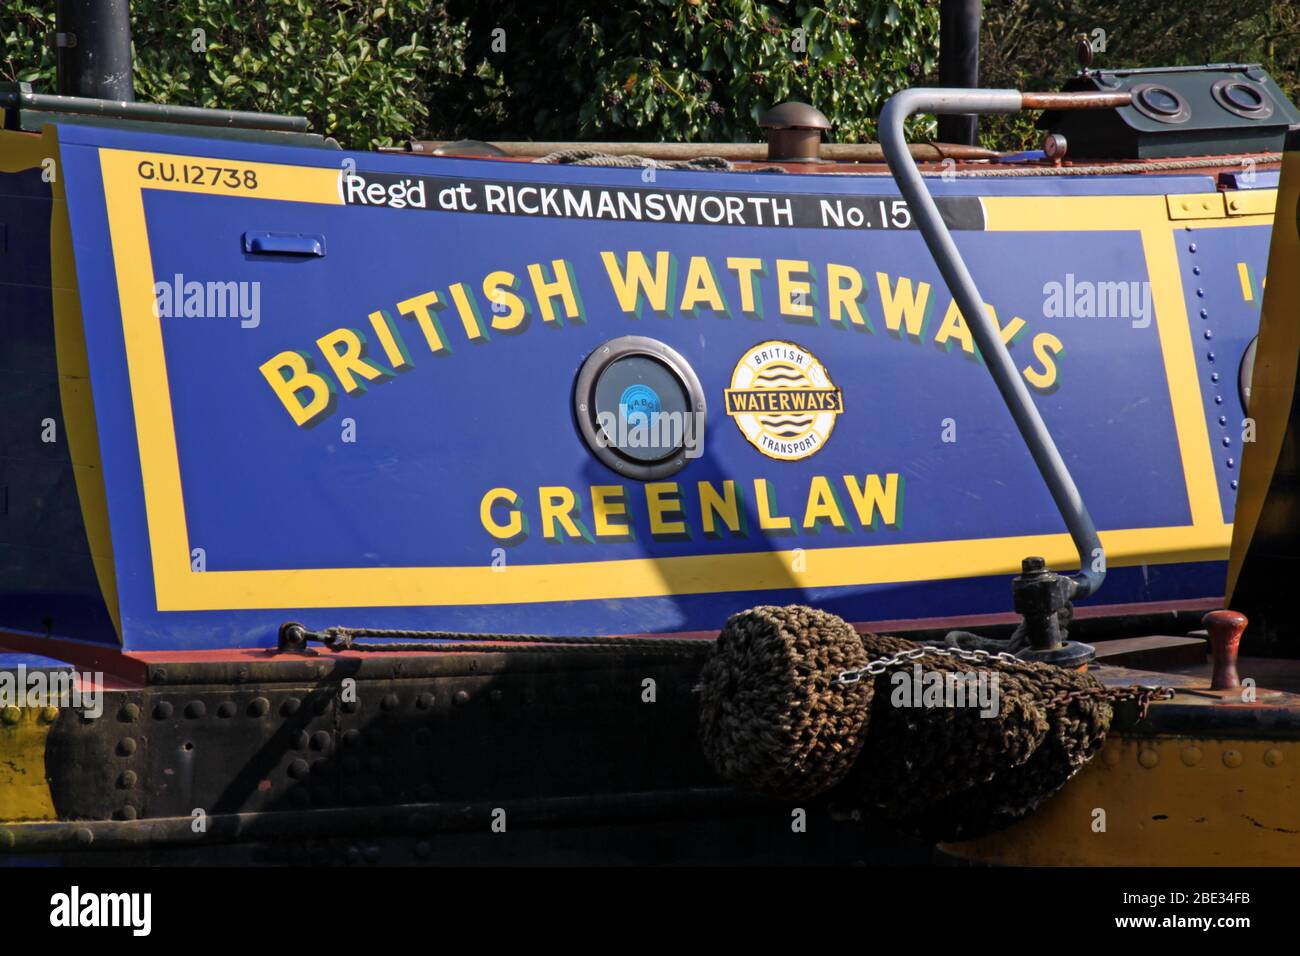 British Canal & River Trust, bateaux de chaland de canal en service, Northwich,Cheshire Ring, British Waterways Greenlaw, Lostock, Cheshire, Angleterre, Royaume-Uni Banque D'Images